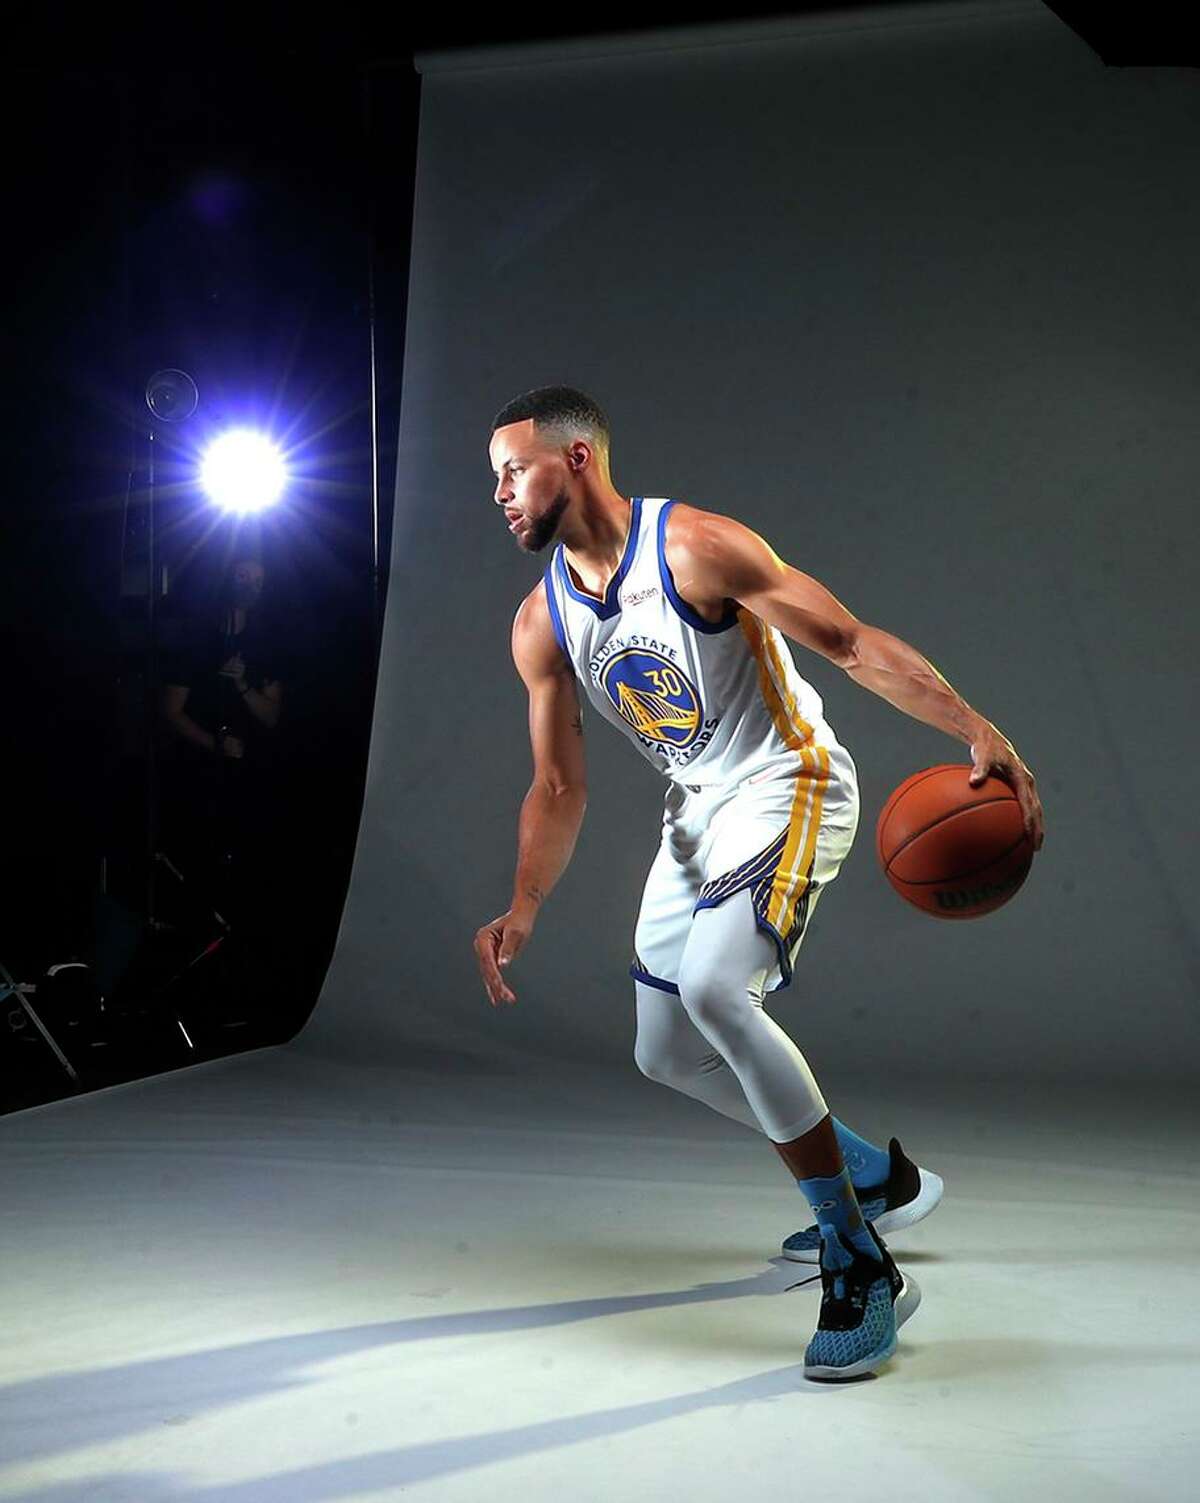 Warriors’ guard Stephen Curry is photographed during media day Monday at Chase Center in San Francisco.